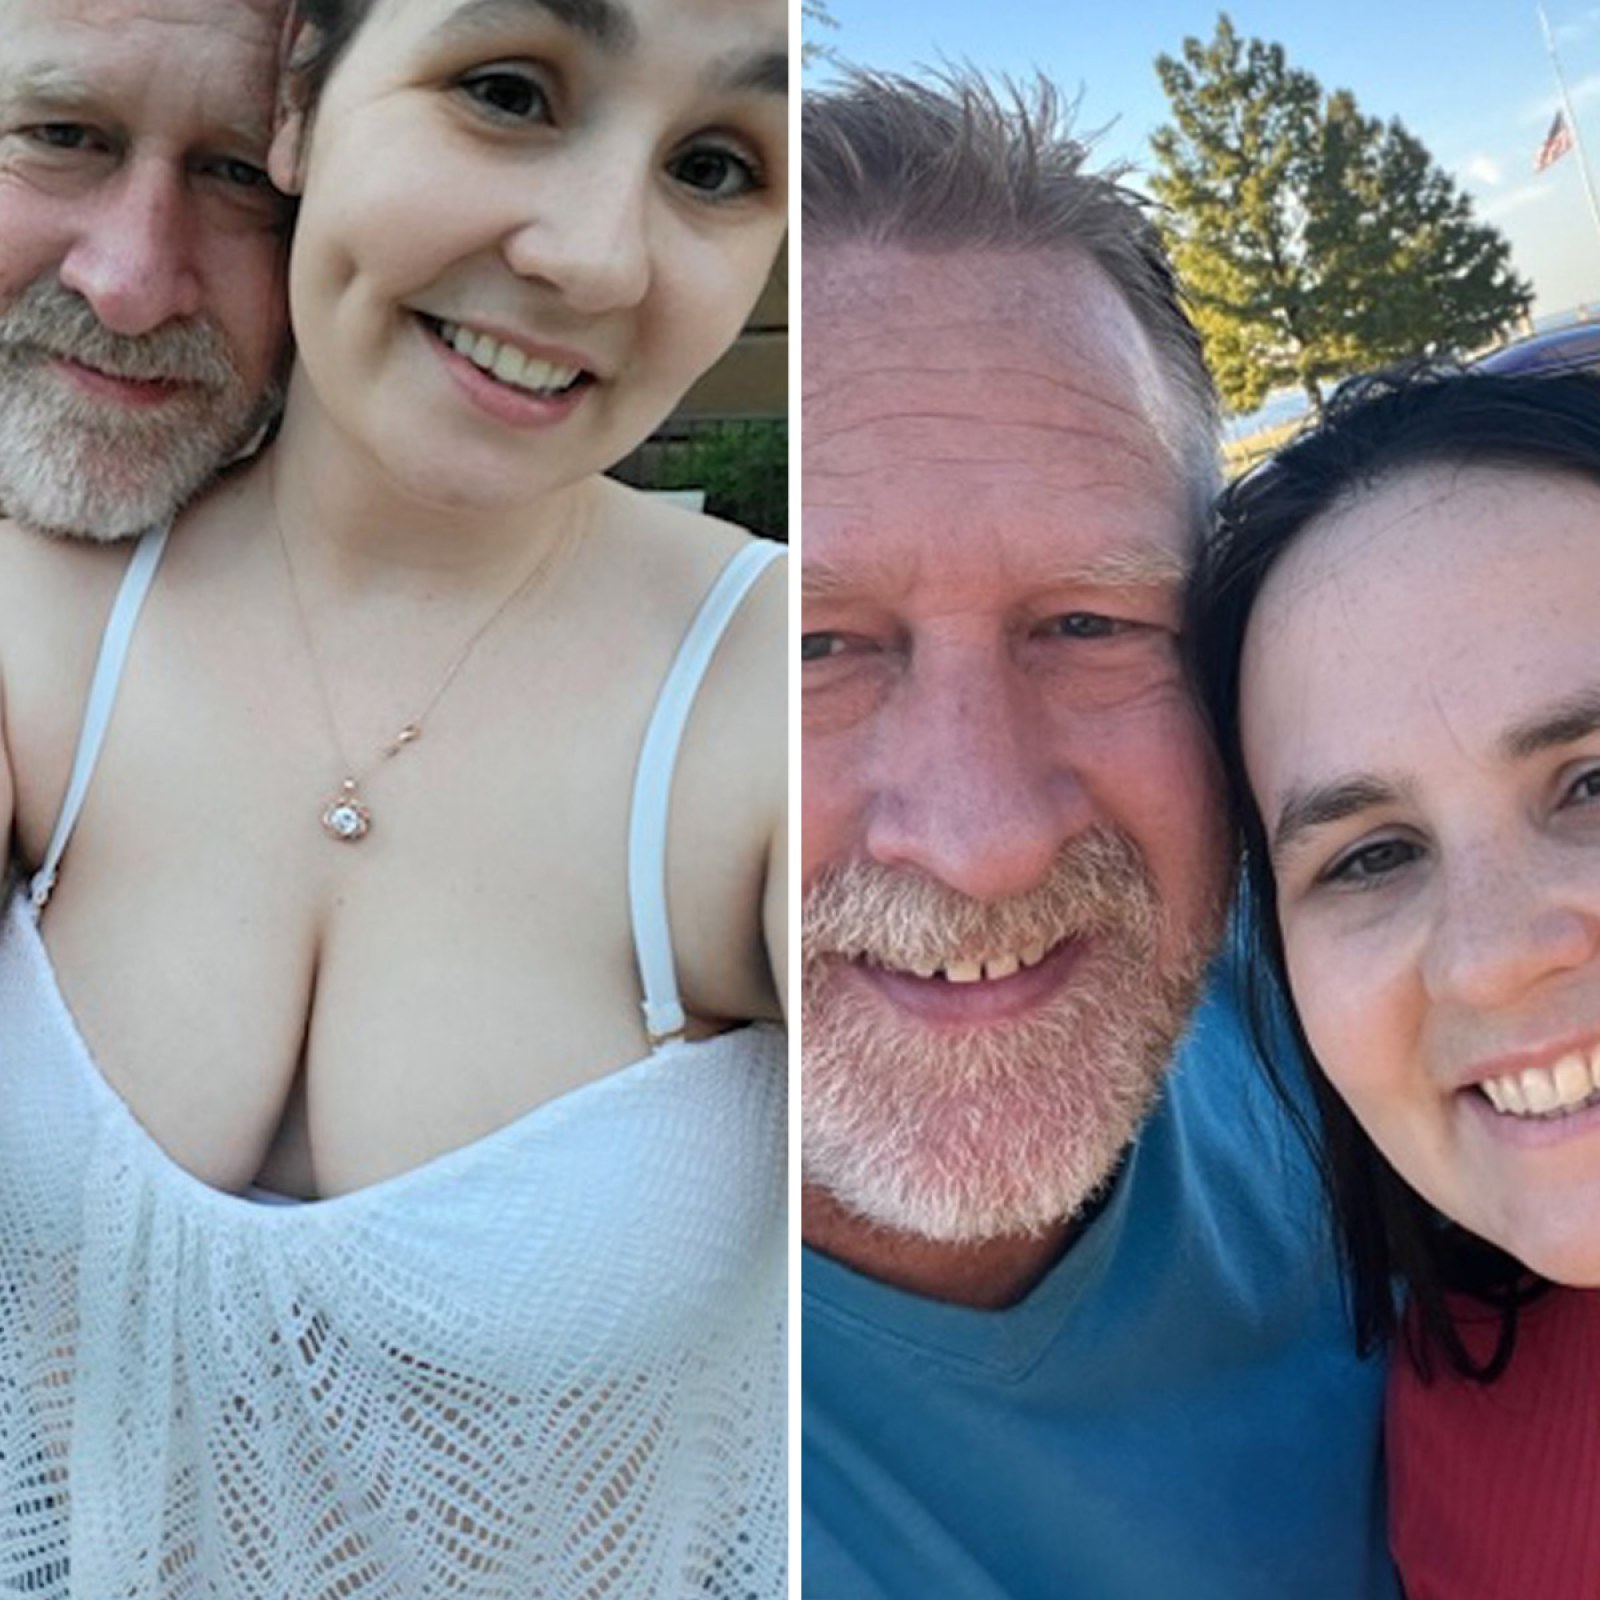 He's My Fiancé, Not My Dad': Woman Defends 21-Year Age Gap Relationship